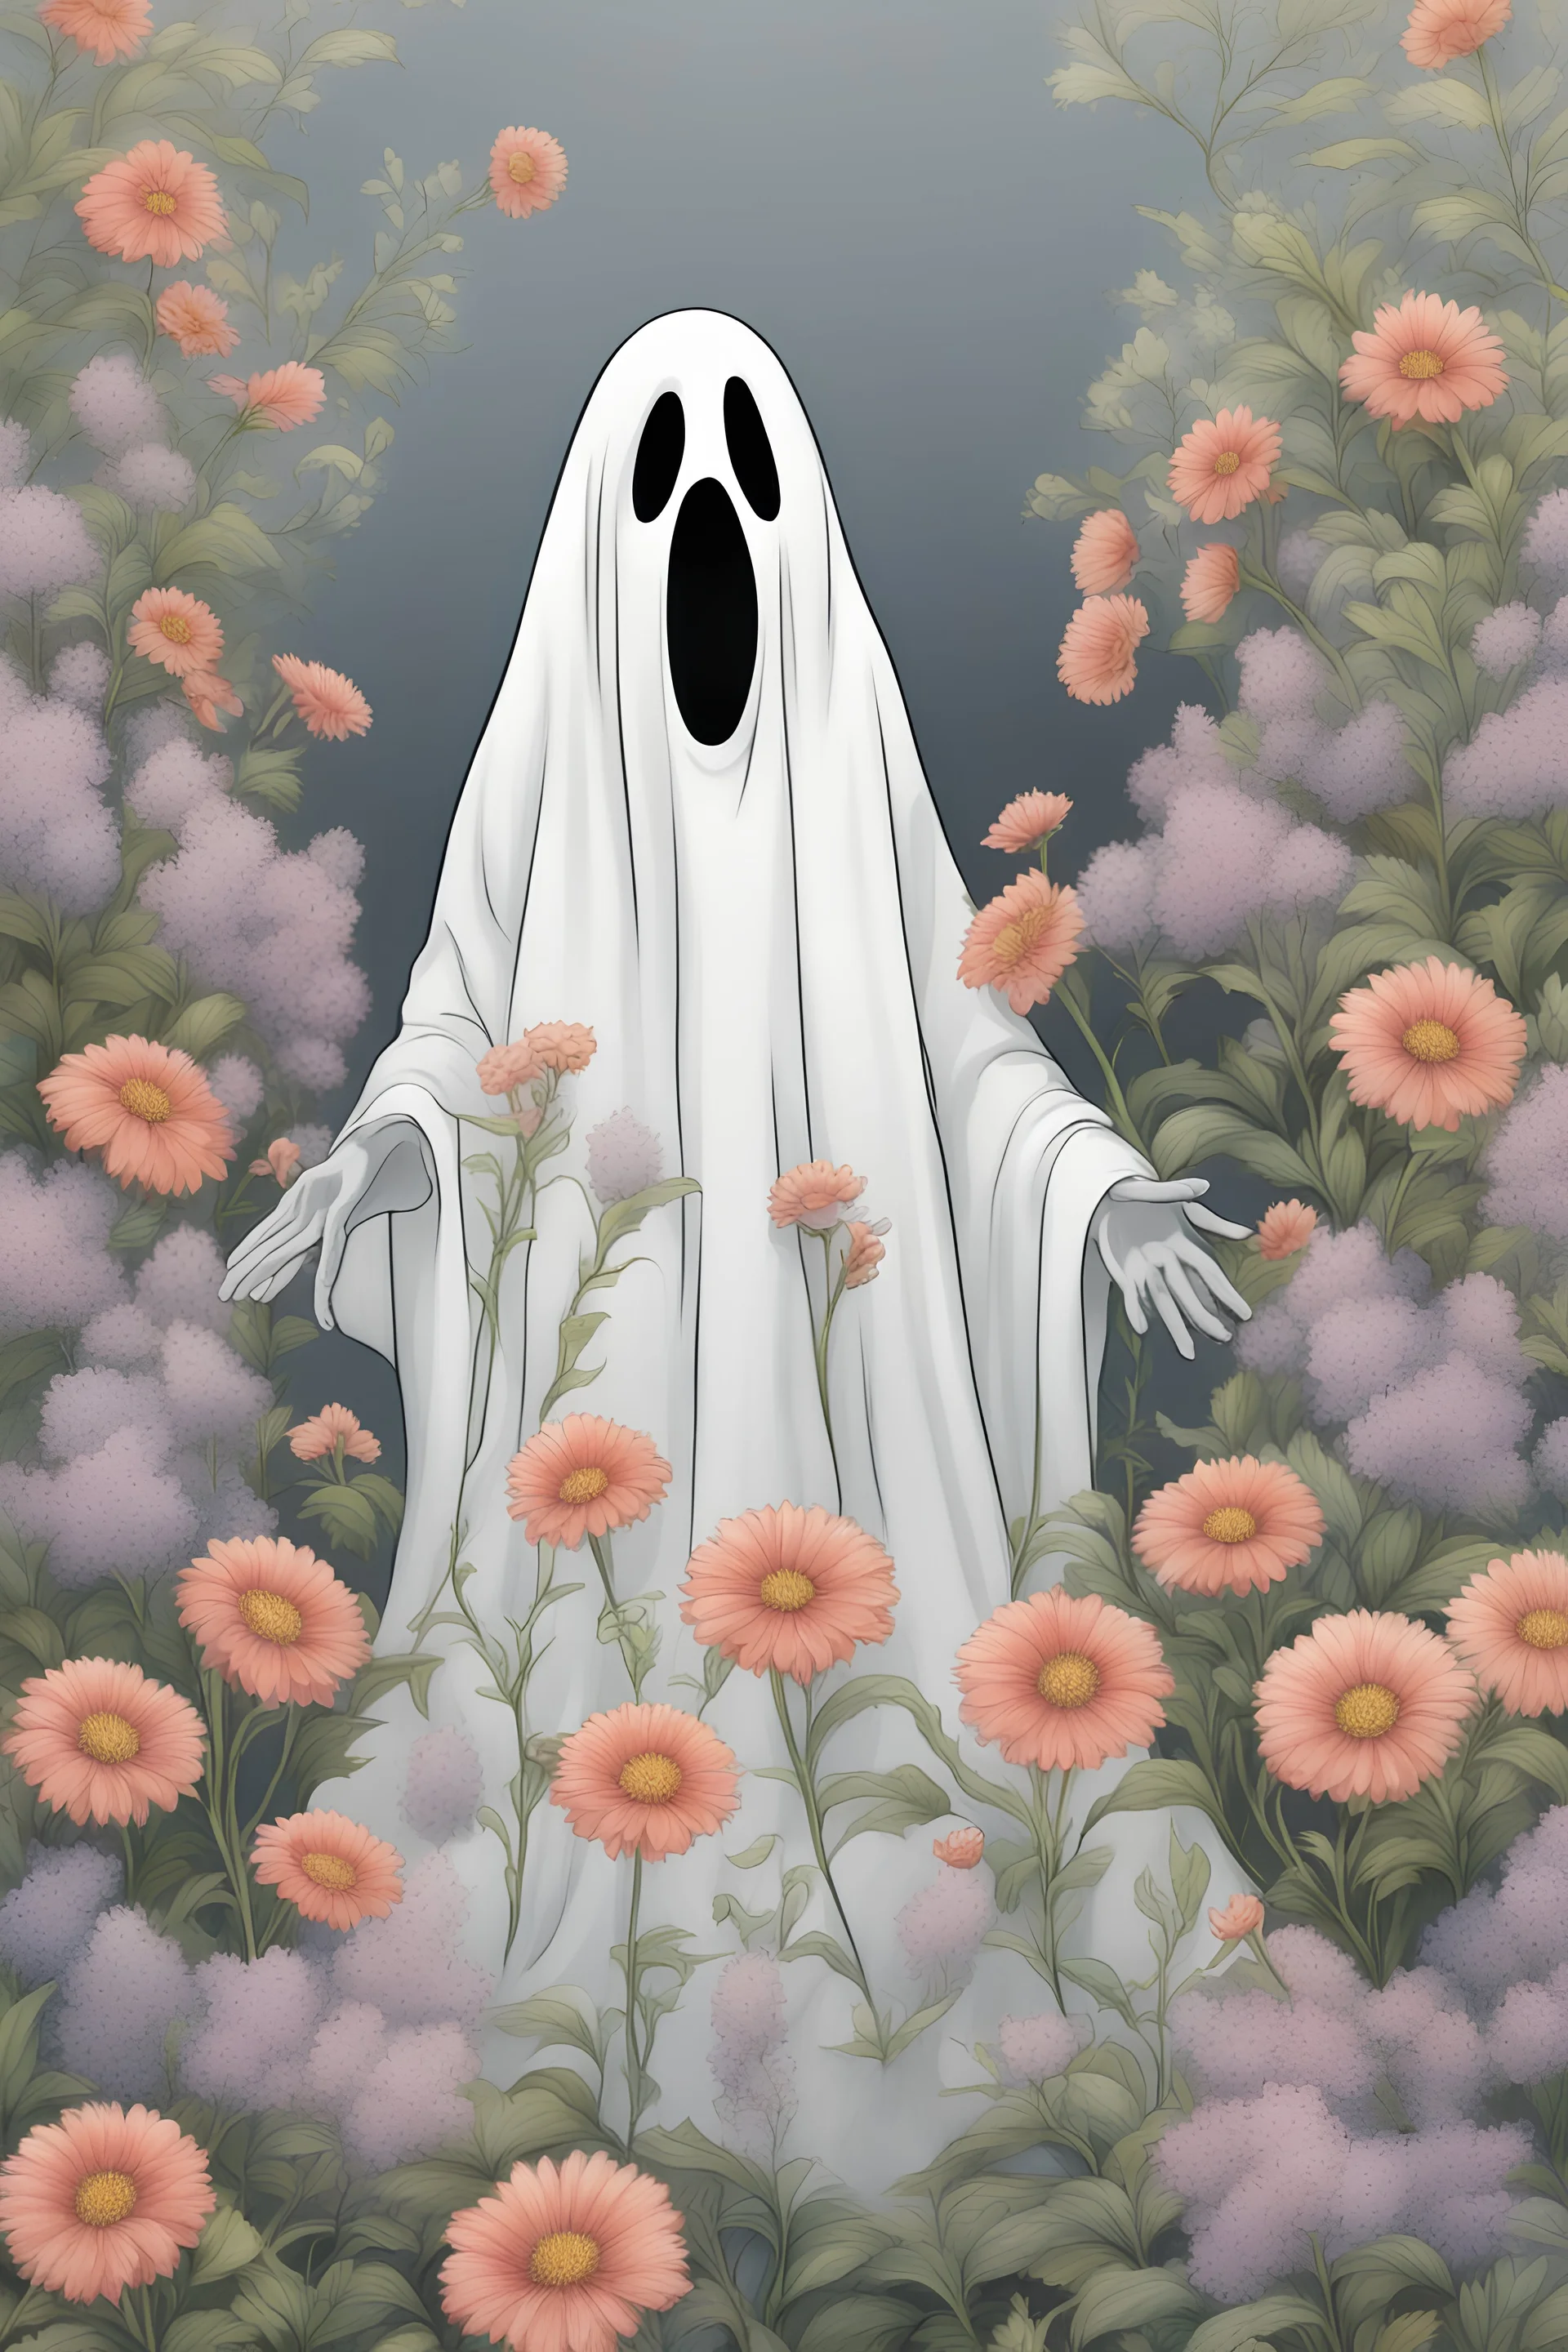 Ghost in Flowers, realistic